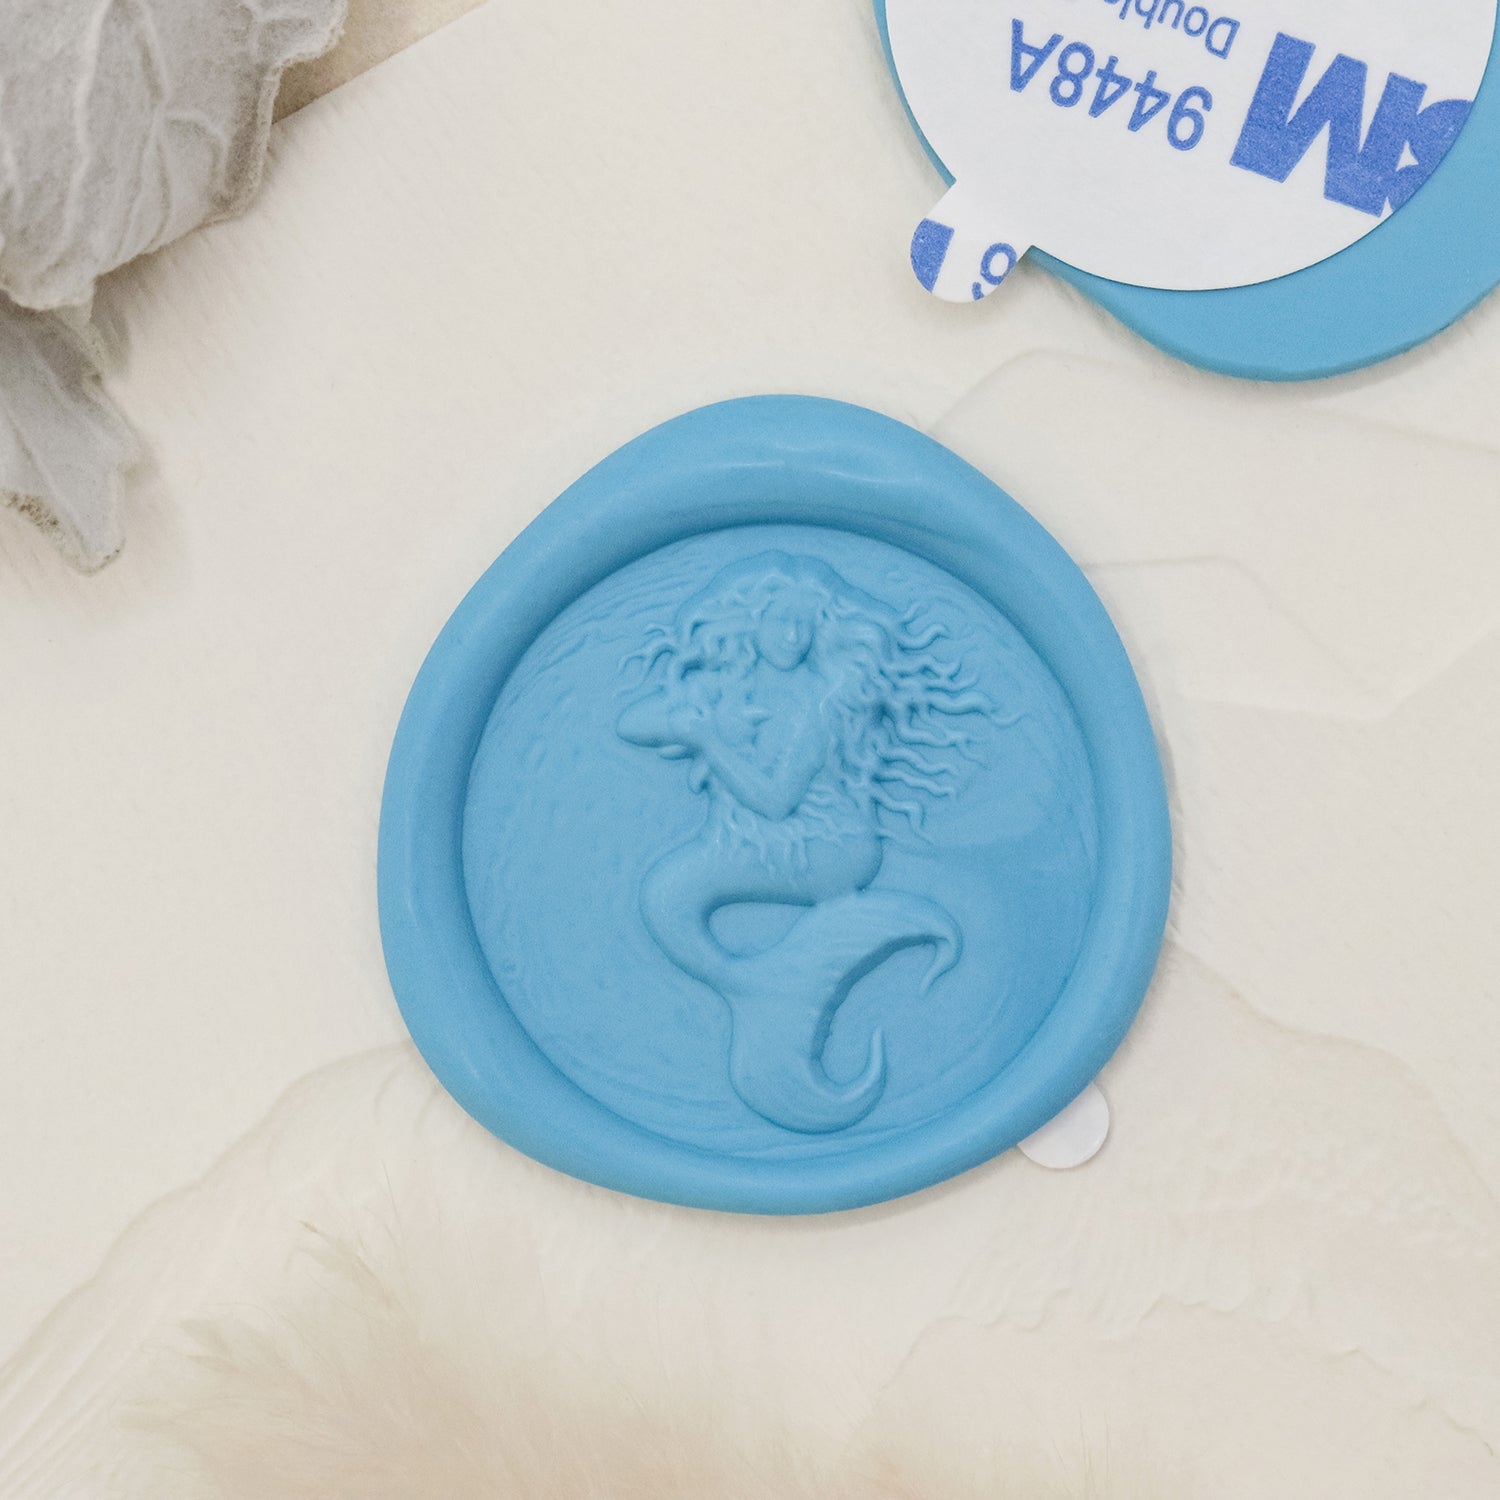 Stamprints 3D Relief Poseidon Self-adhesive Wax Seal Stickers 1